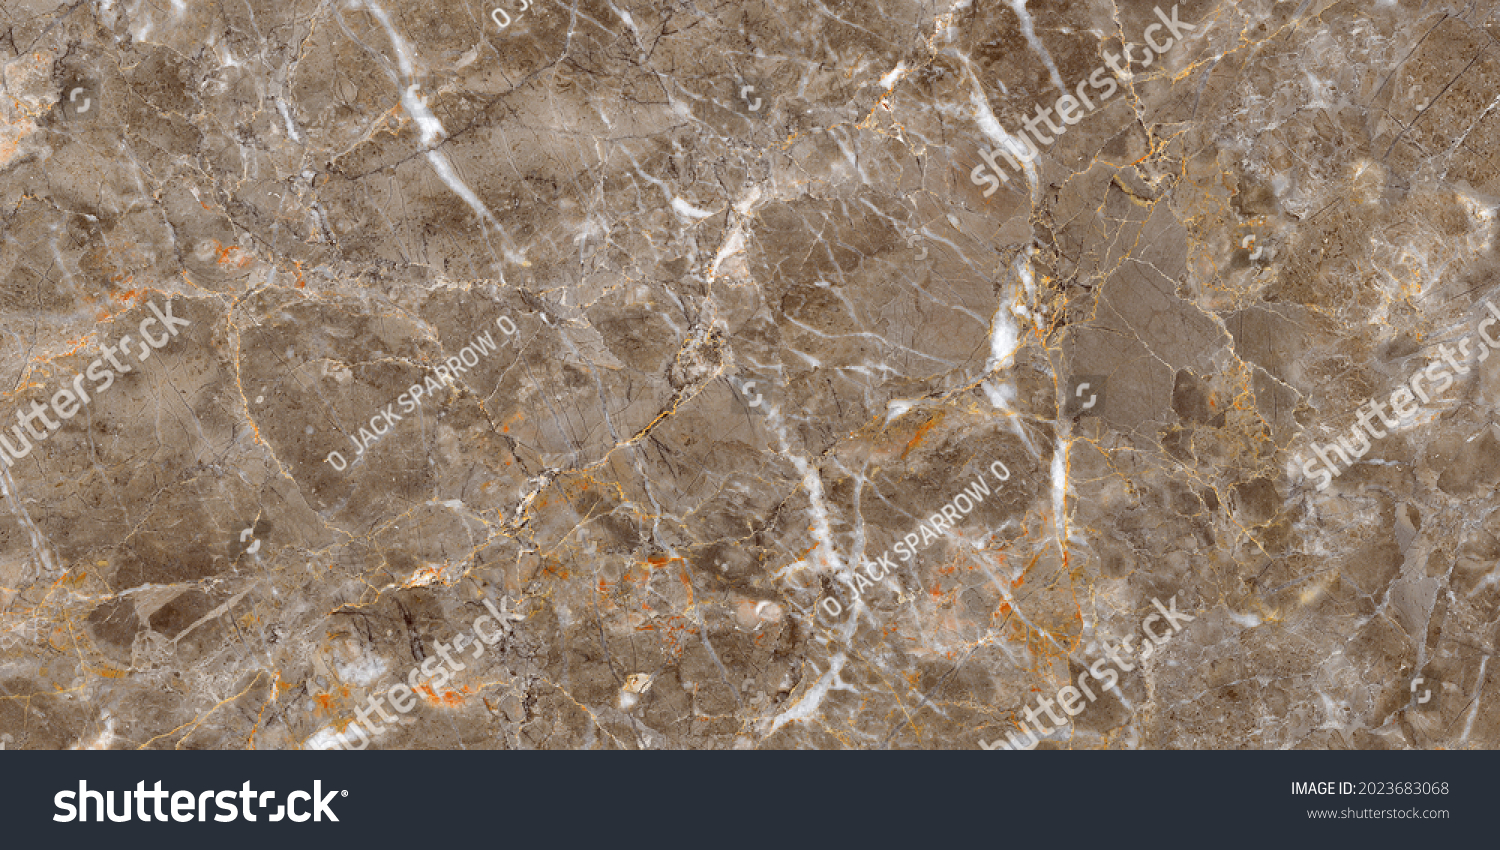 Natural Marble Texture With High Resolution Granite Surface Design For Italian Slab Marble Background Used Ceramic Wall Tiles And Floor Tiles. #2023683068